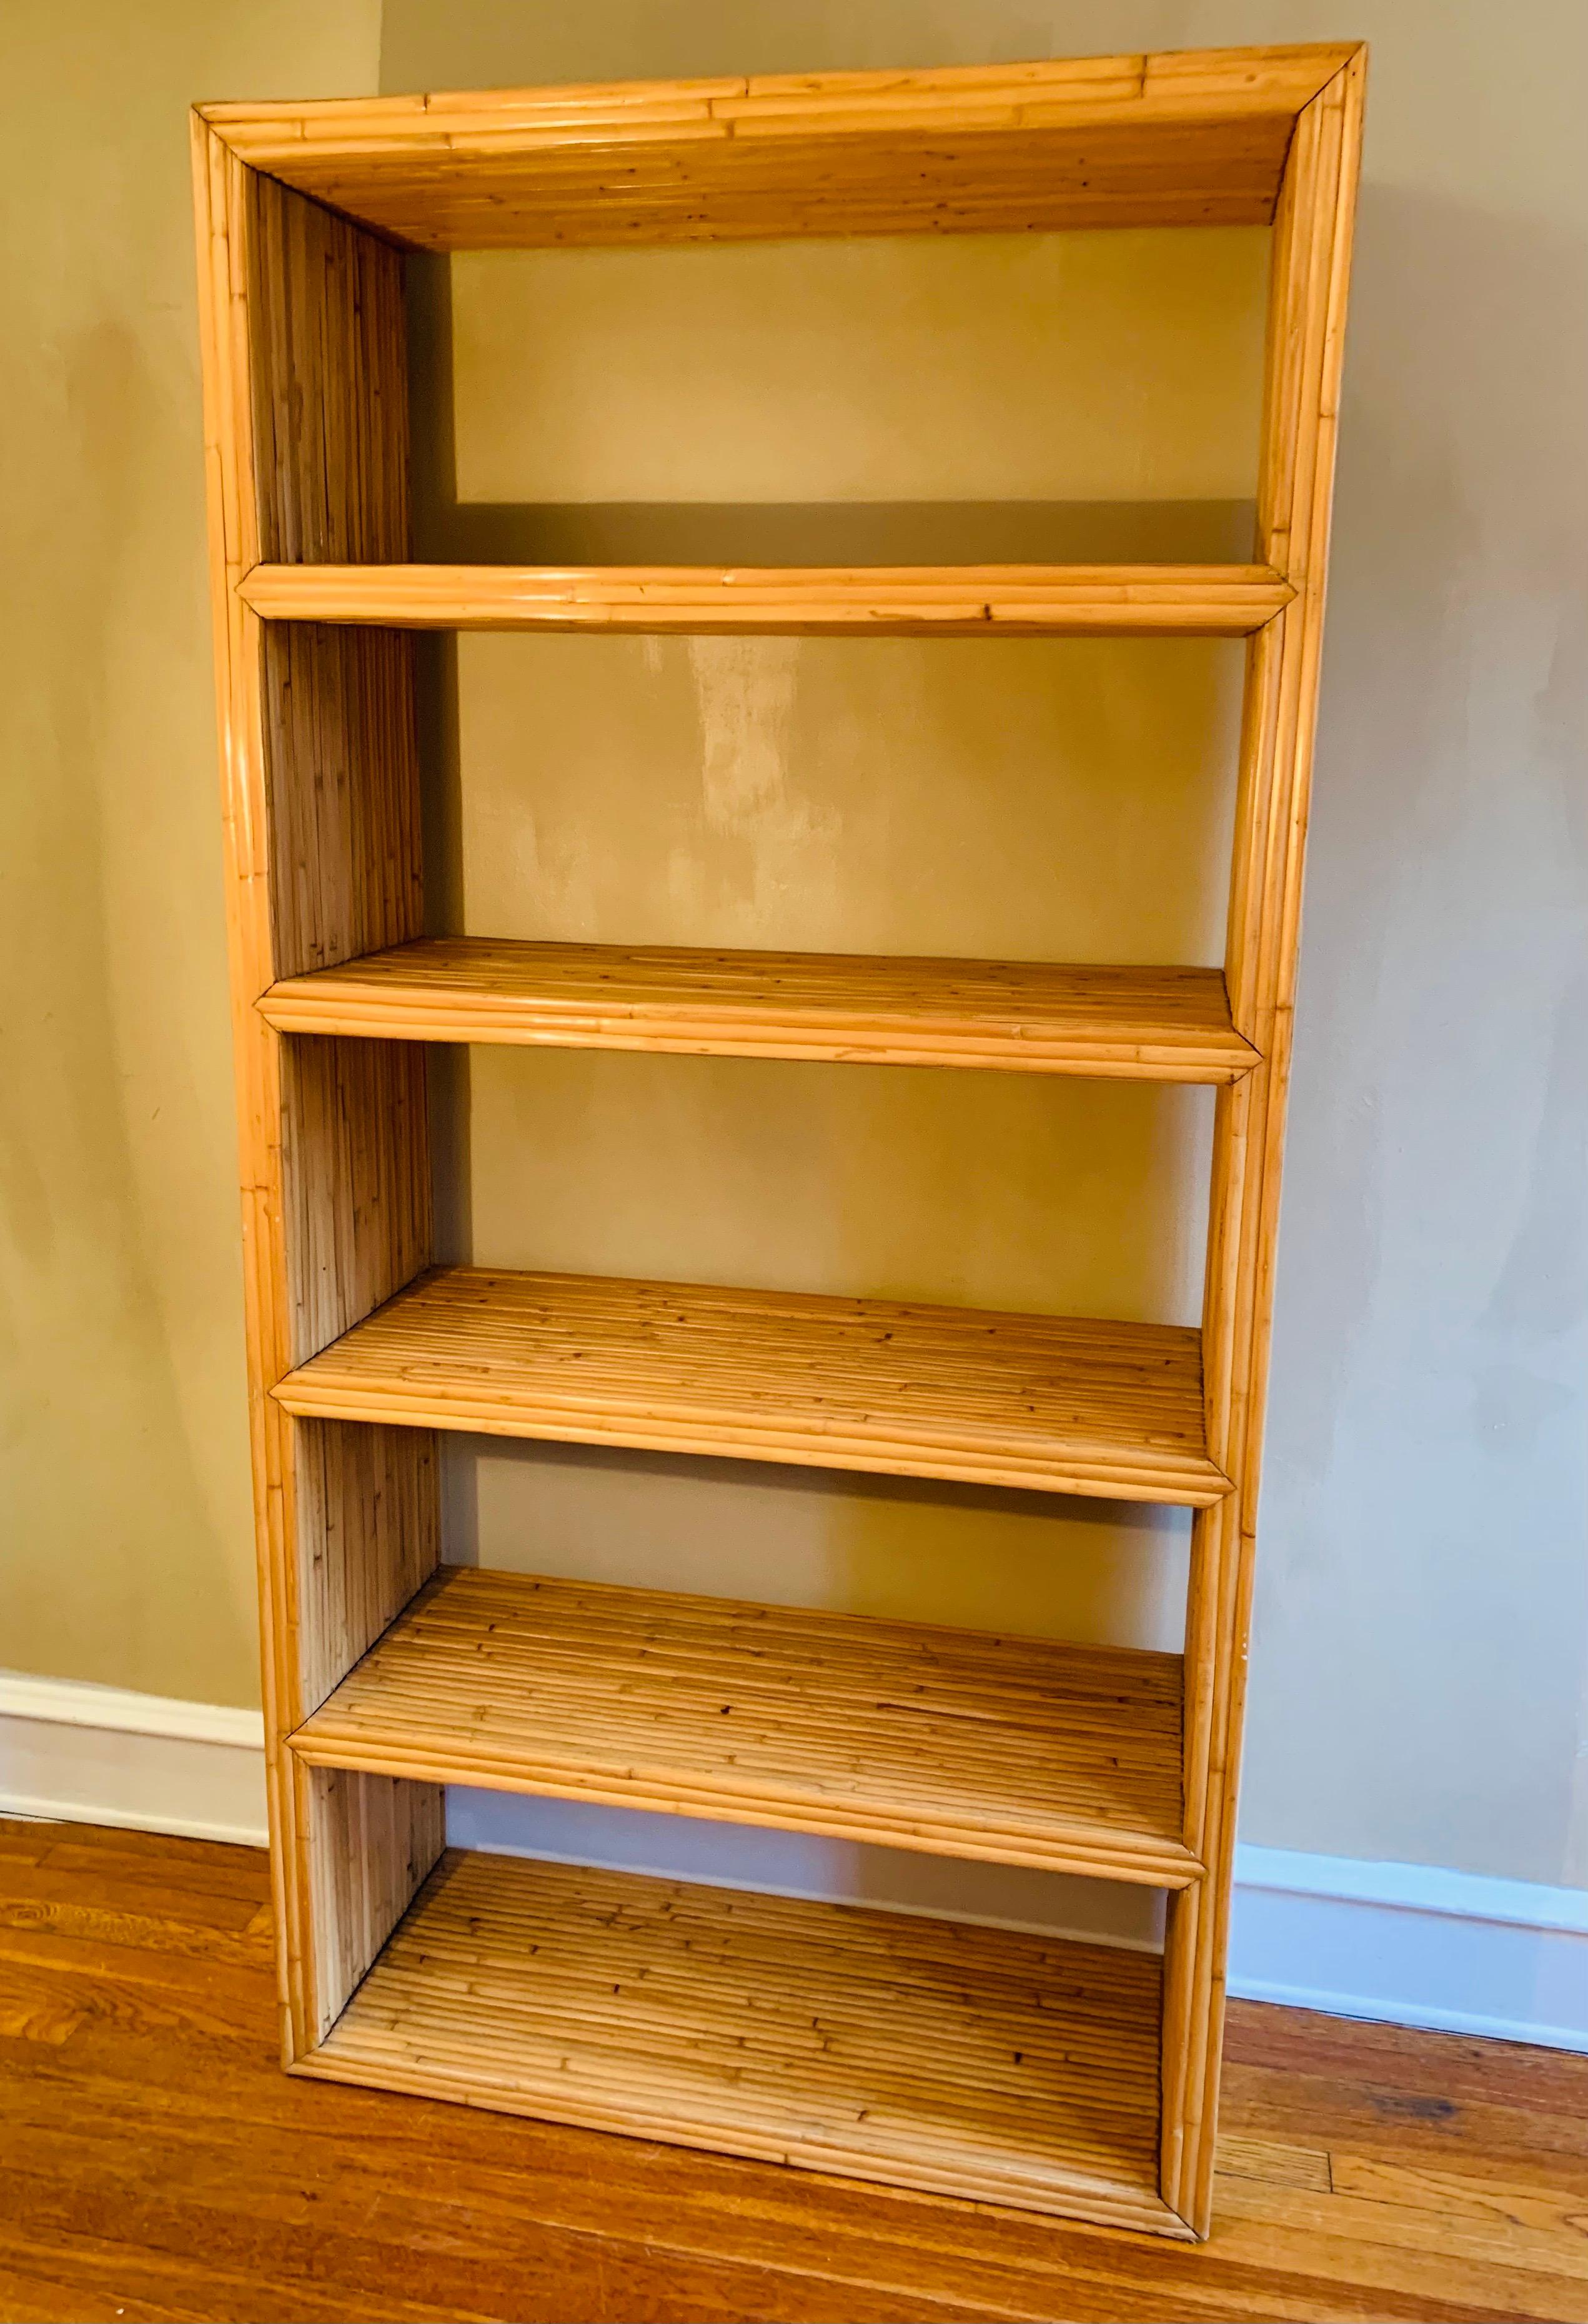 Fantastic fully-finished shelving unit, comprised of split-reed bamboo applied over wood.